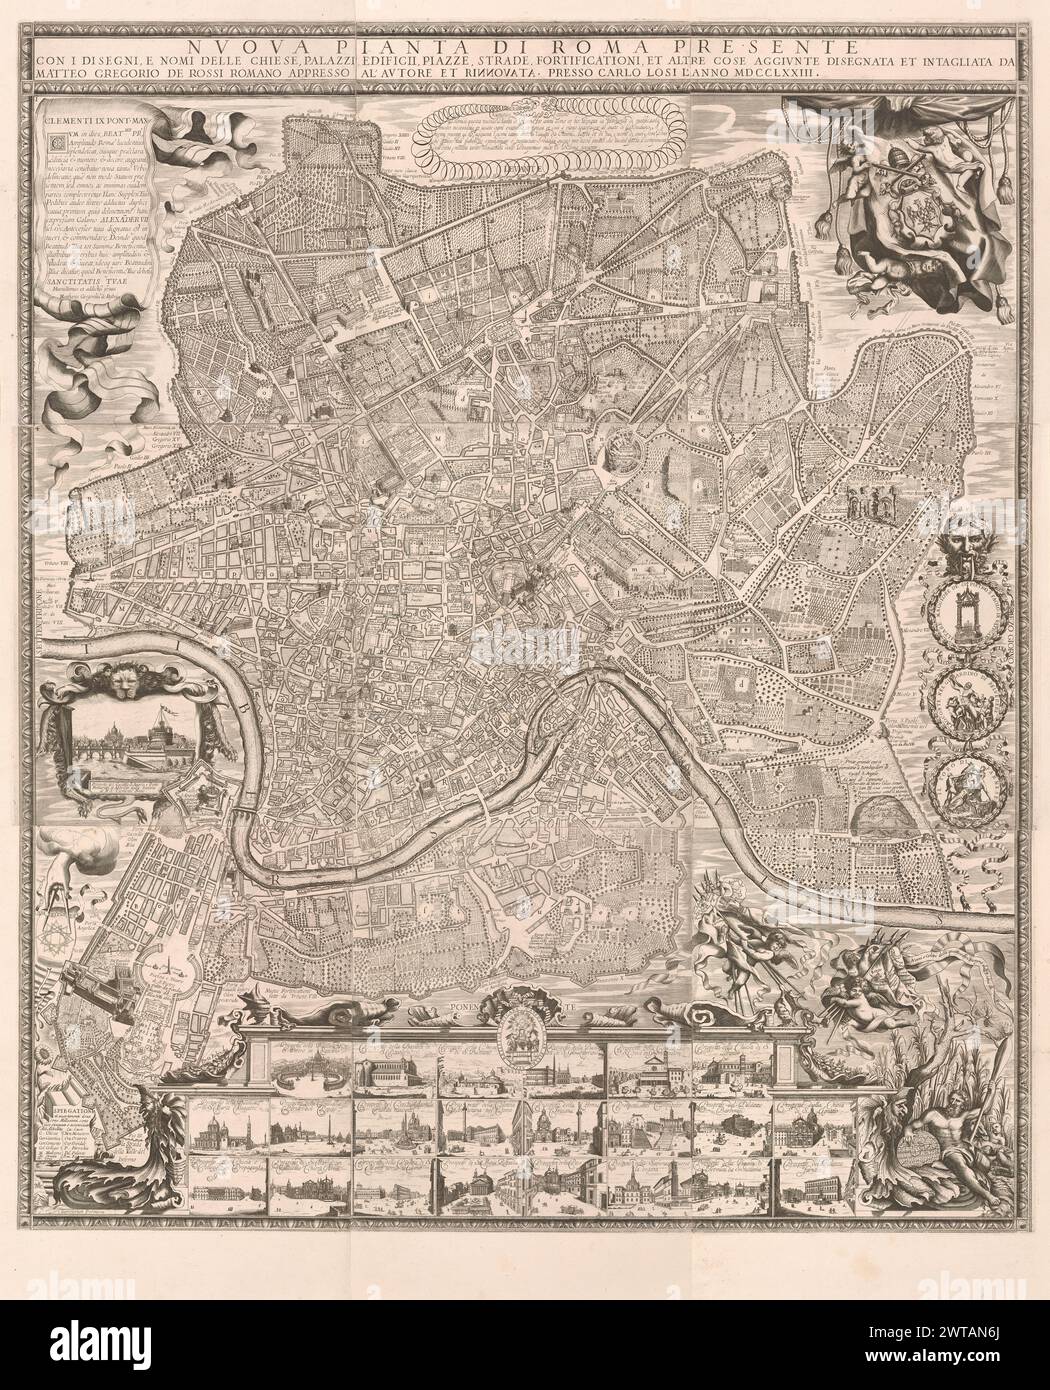 Nuoua pianta di Roma presente ..., 1773. Rossi, Matteo Gregorio de, 1638-1702, designer, engraver. l'anno MDCCLXXIII [1773] The map is Matteo Gregorio de Rossi's large bird's-eye view of modern Rome, which was first published by his father Giovanni Battista in 1668. The second edition by Matteo Gregorio himself was issued in 1680, with additions and corrections. Third ed. 1721-24. Present (fourth) ed. has title changed to reflect Losi as publisher. Title and imprint in reserve across top 3 panels. Dedication to Clement IX at upper left of combined image, retained from 1st ed. Arms of Innocent Stock Photo